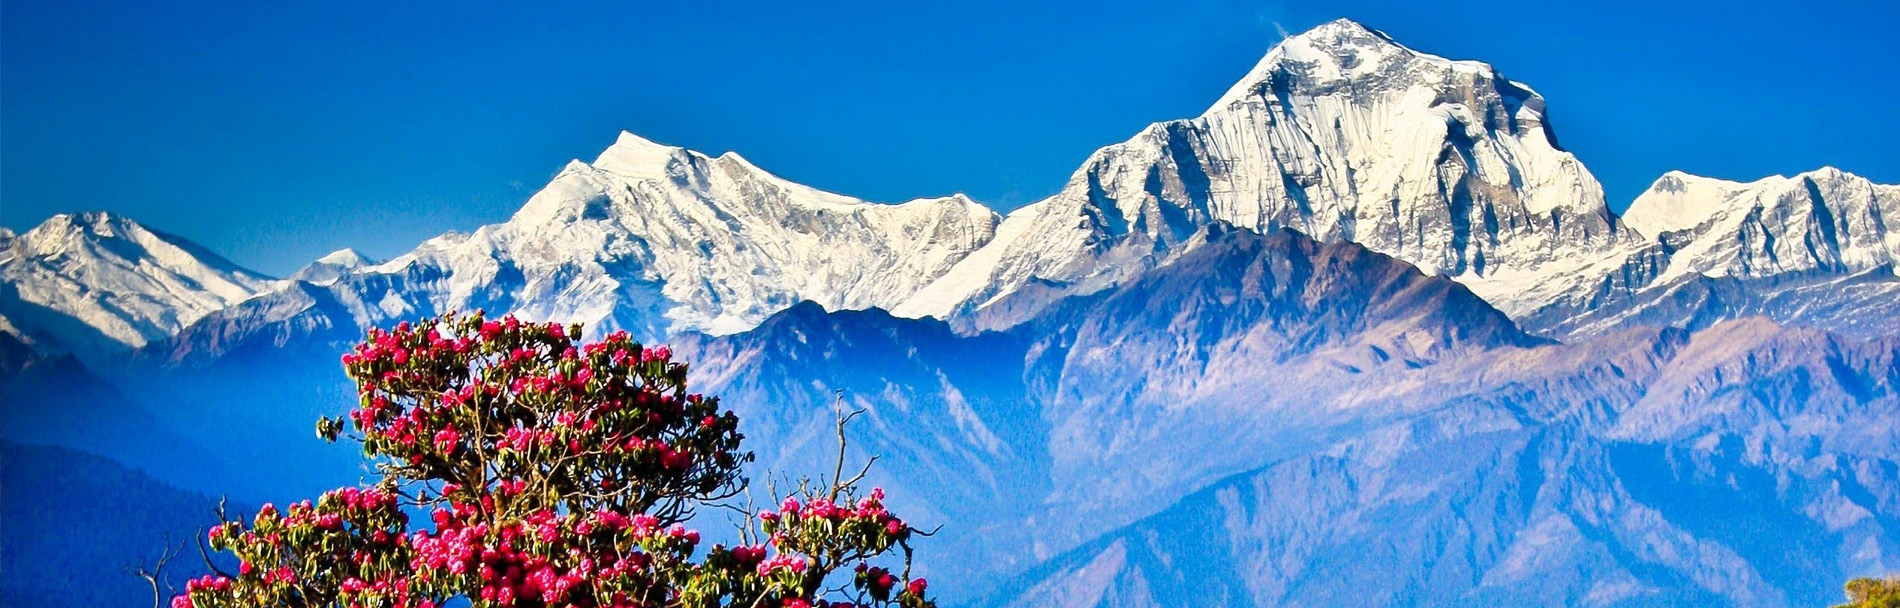 Nepal Tour Package - 3 Nights